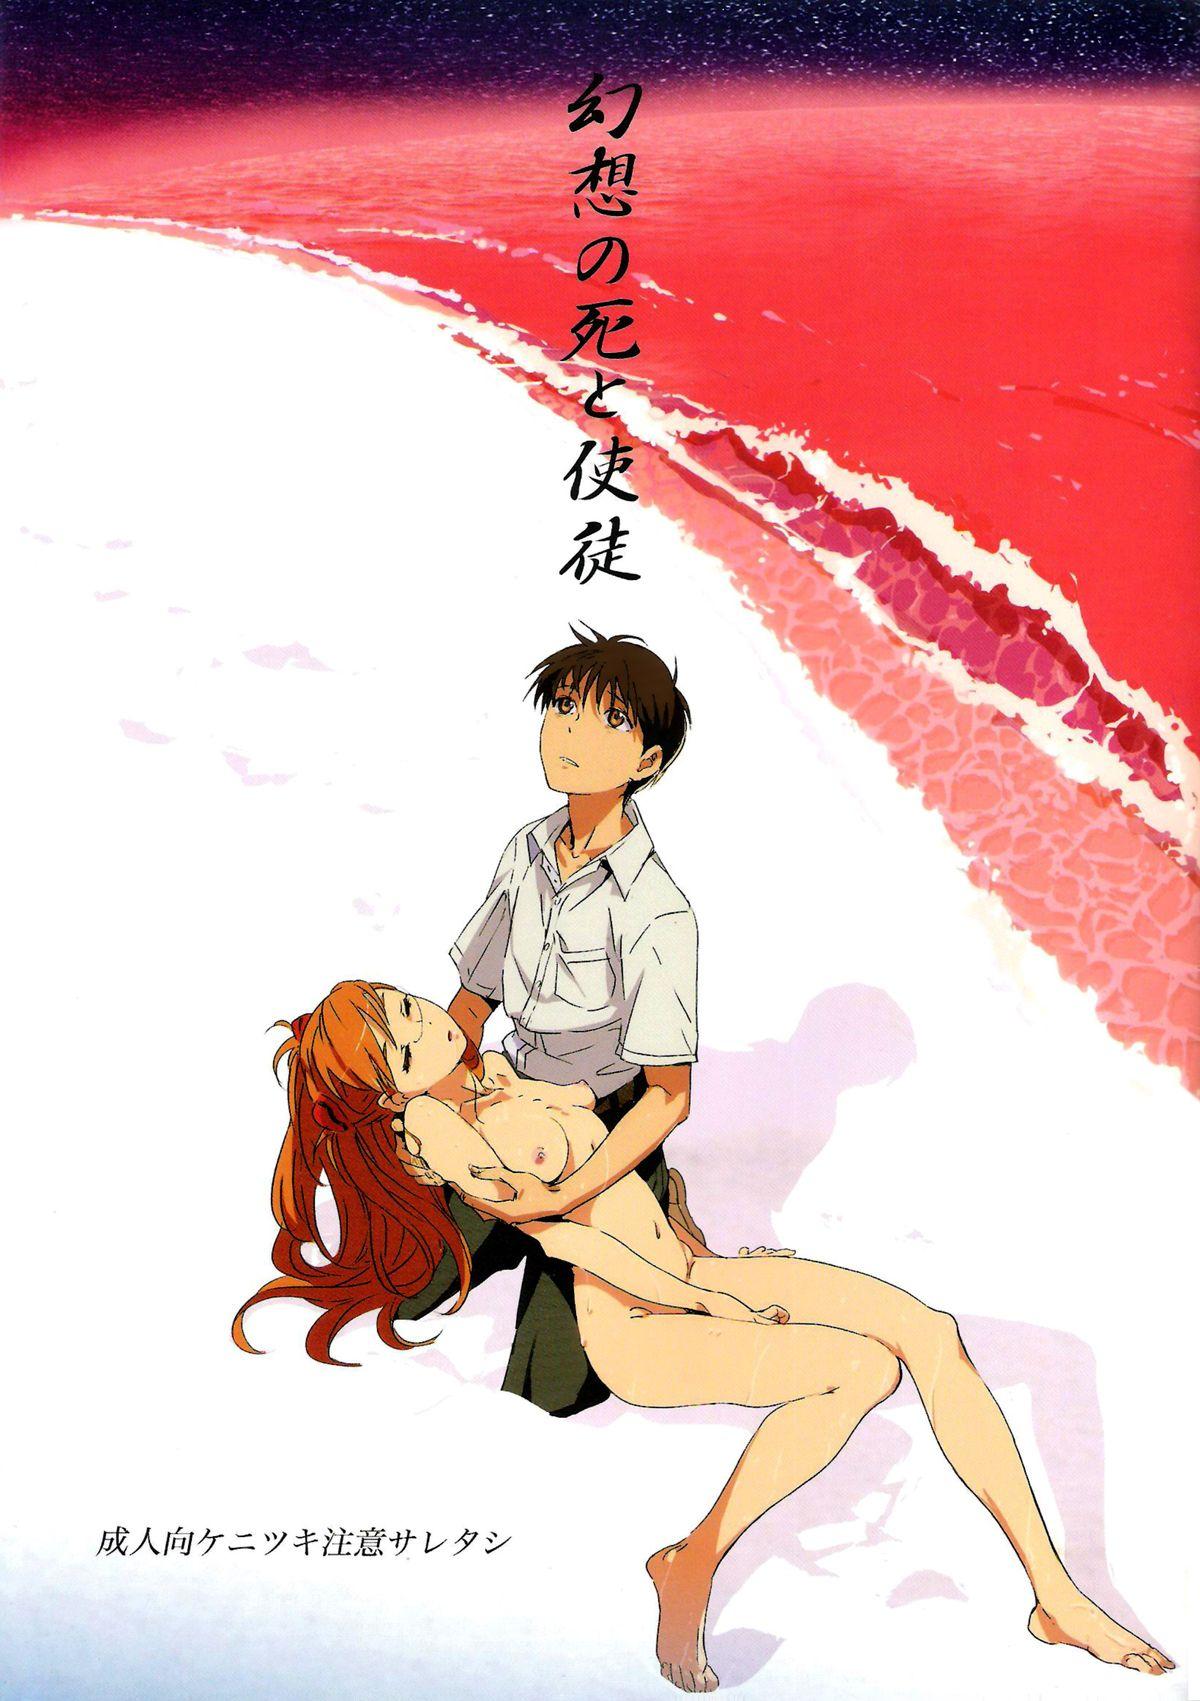 Fit Gensou no Shi to Shito | Death of Illusion and an Angel - Neon genesis evangelion 8teenxxx - Picture 1